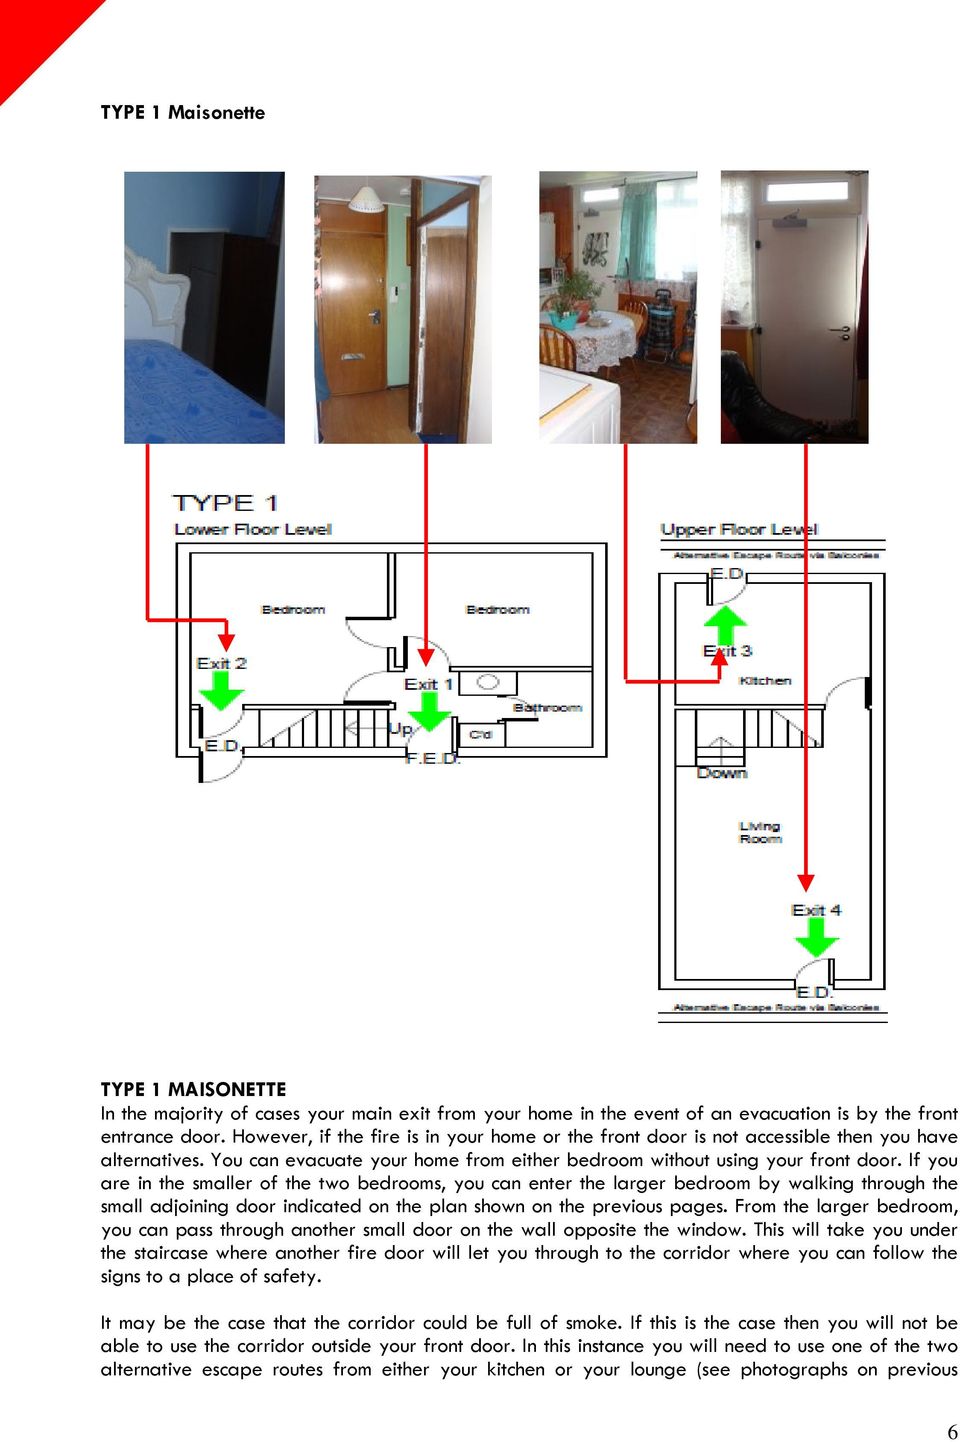 If you are in the smaller of the two bedrooms, you can enter the larger bedroom by walking through the small adjoining door indicated on the plan shown on the previous pages.